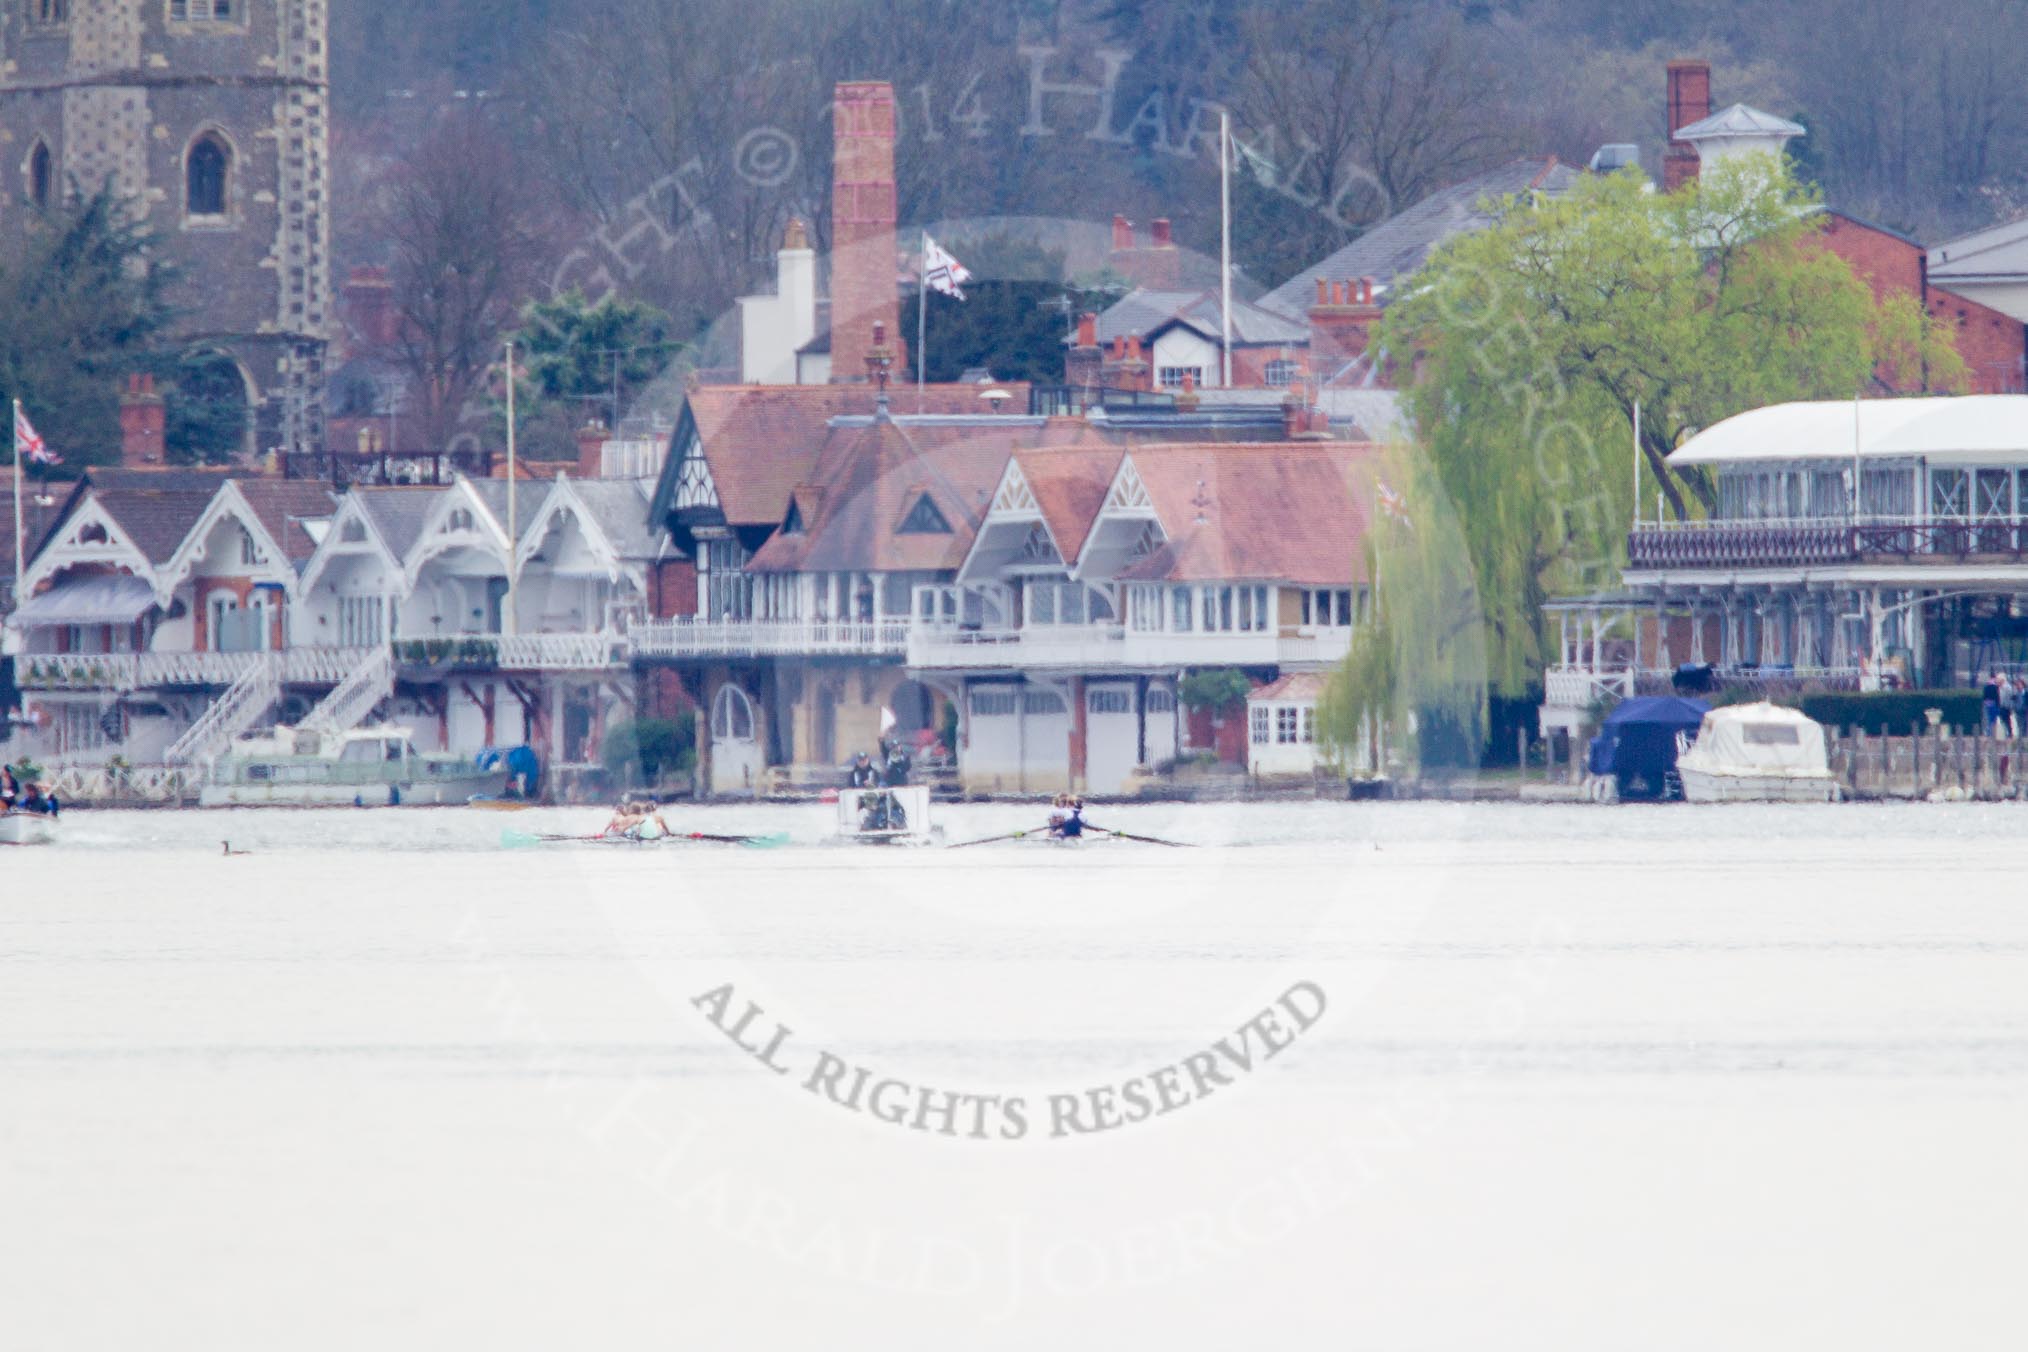 The Women's Boat Race and Henley Boat Races 2014: The start of the Newton Women's Boat Race at Henley. Oxford is on the right (Bucks) side, following the boats is the umpire's launch..
River Thames,
Henley-on-Thames,
Buckinghamshire,
United Kingdom,
on 30 March 2014 at 15:11, image #278